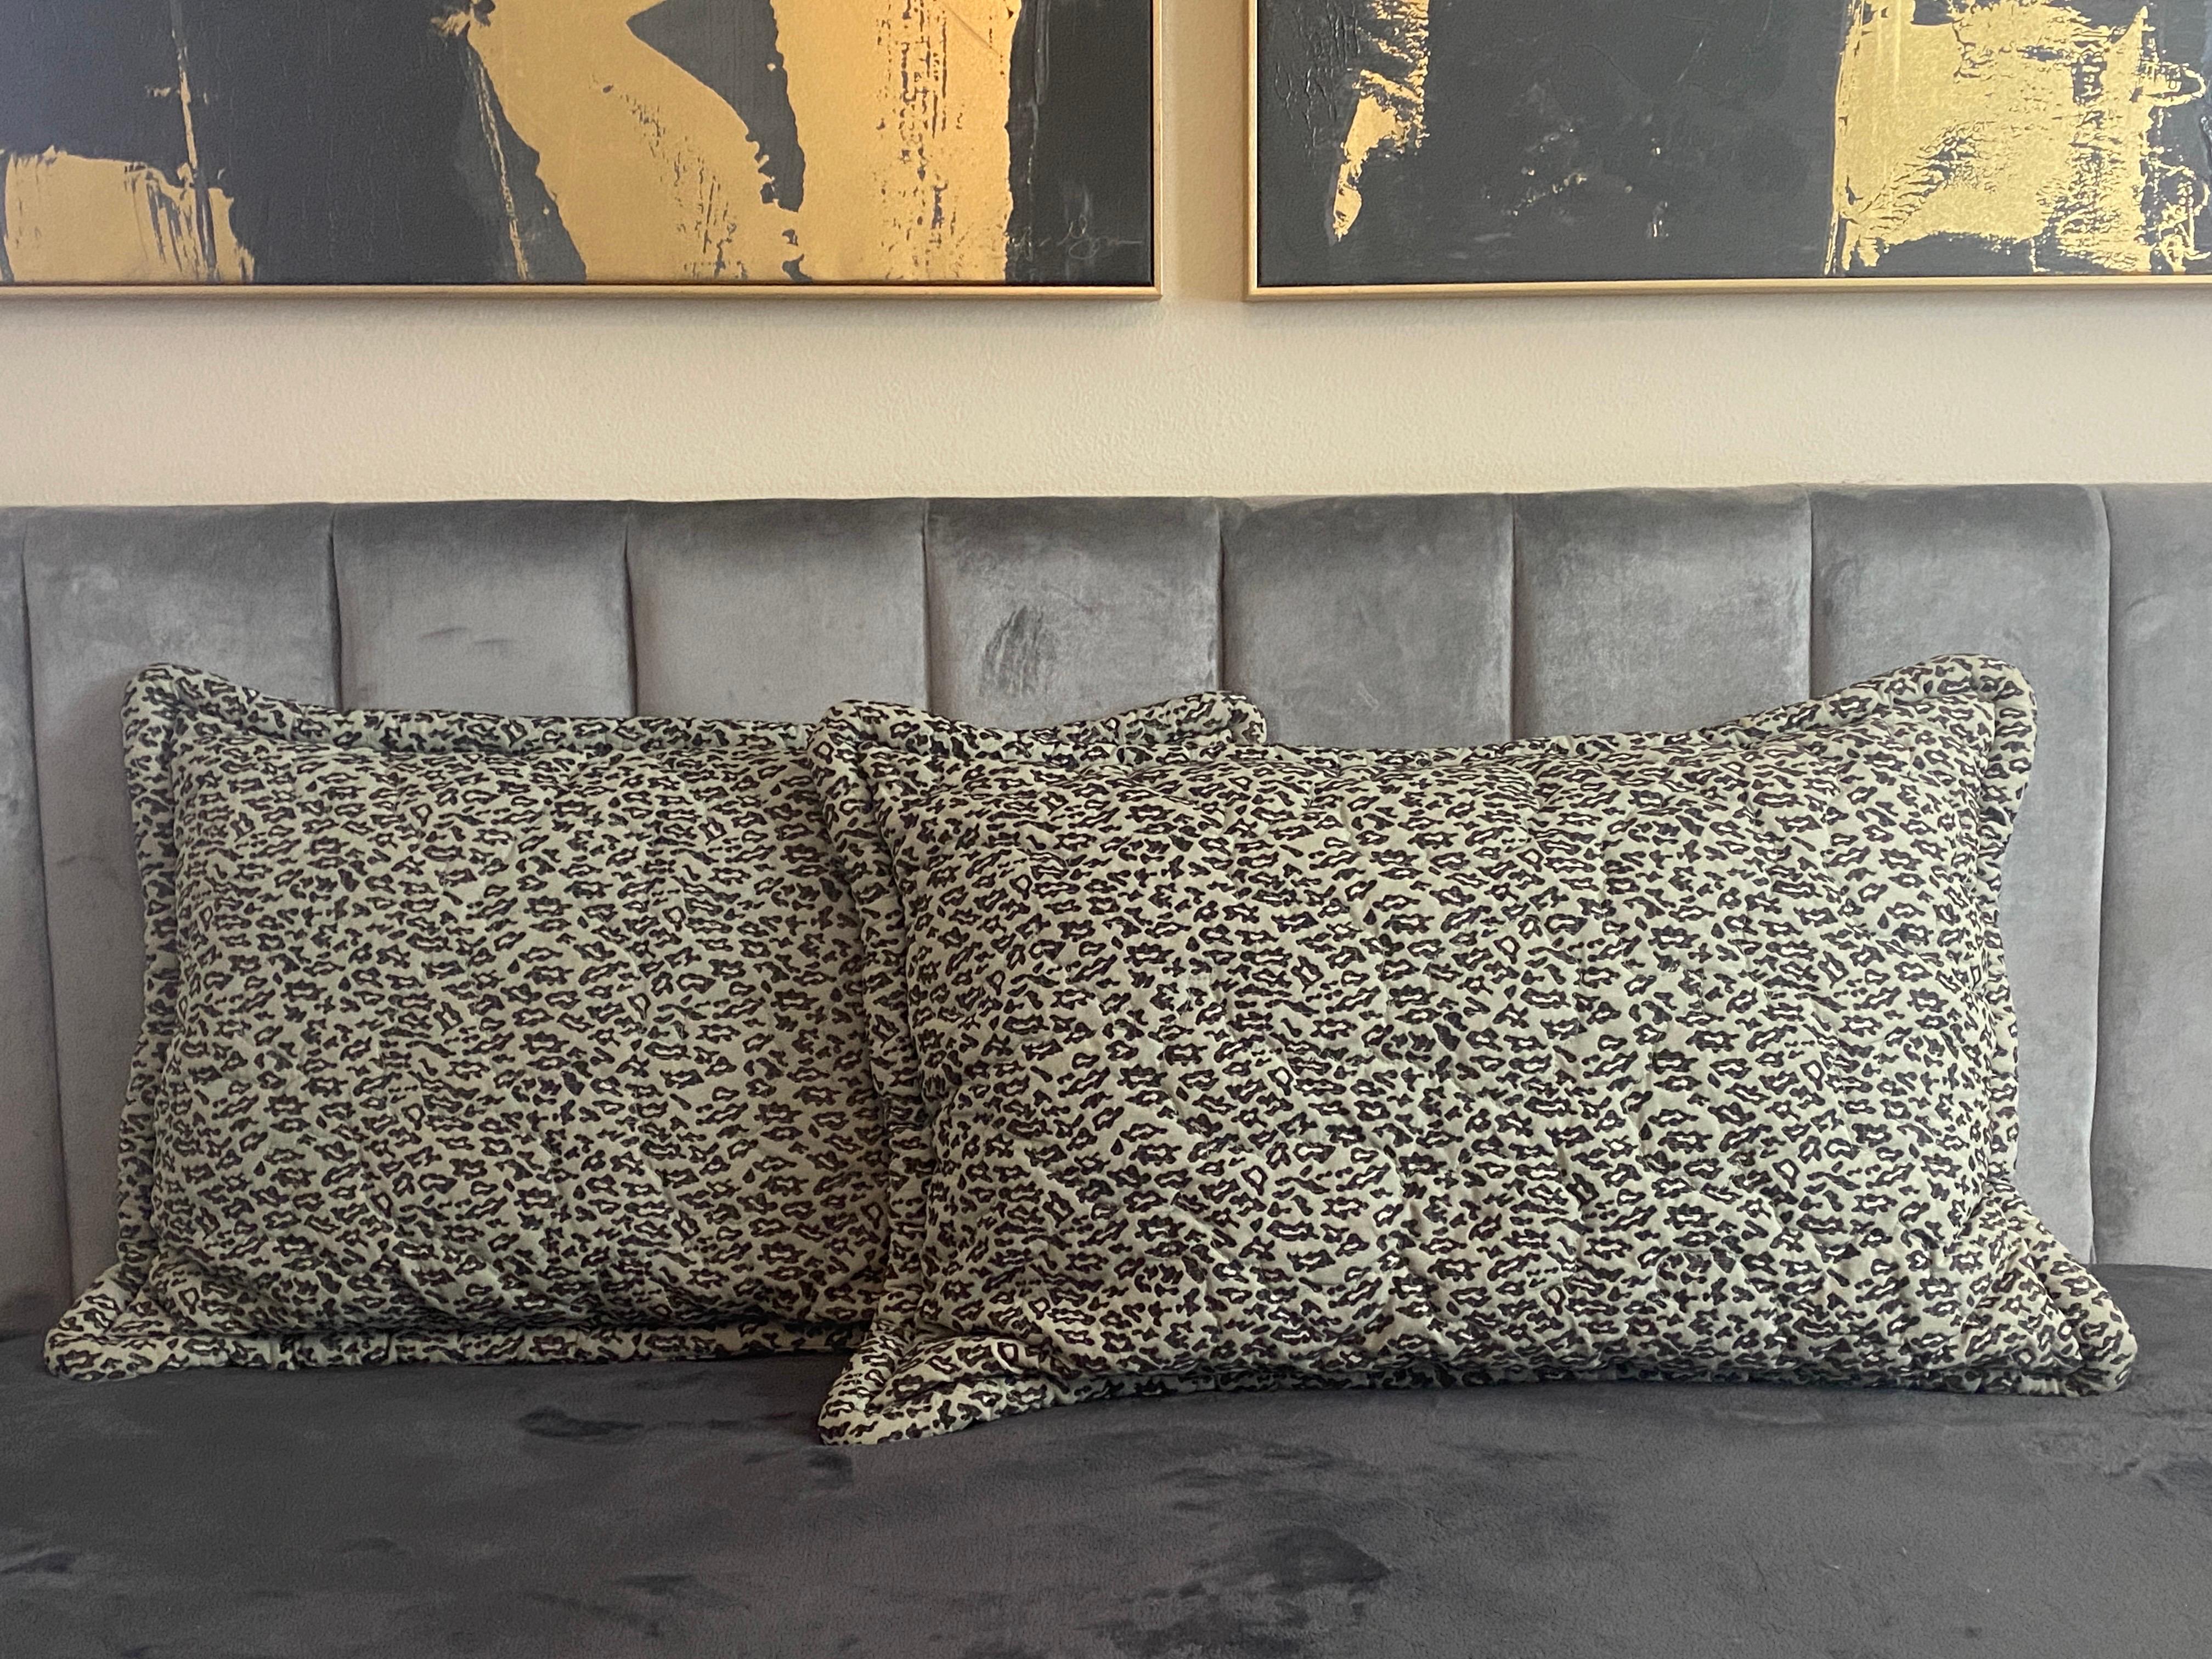 This rare pair of quilted mint color with black and white leopard pattern jacquard pillow shams came from Bloomingdale’s New York in the 1980s as part of the all upholsterd, mint green, leopard bed set designed entirely by the legendary interior